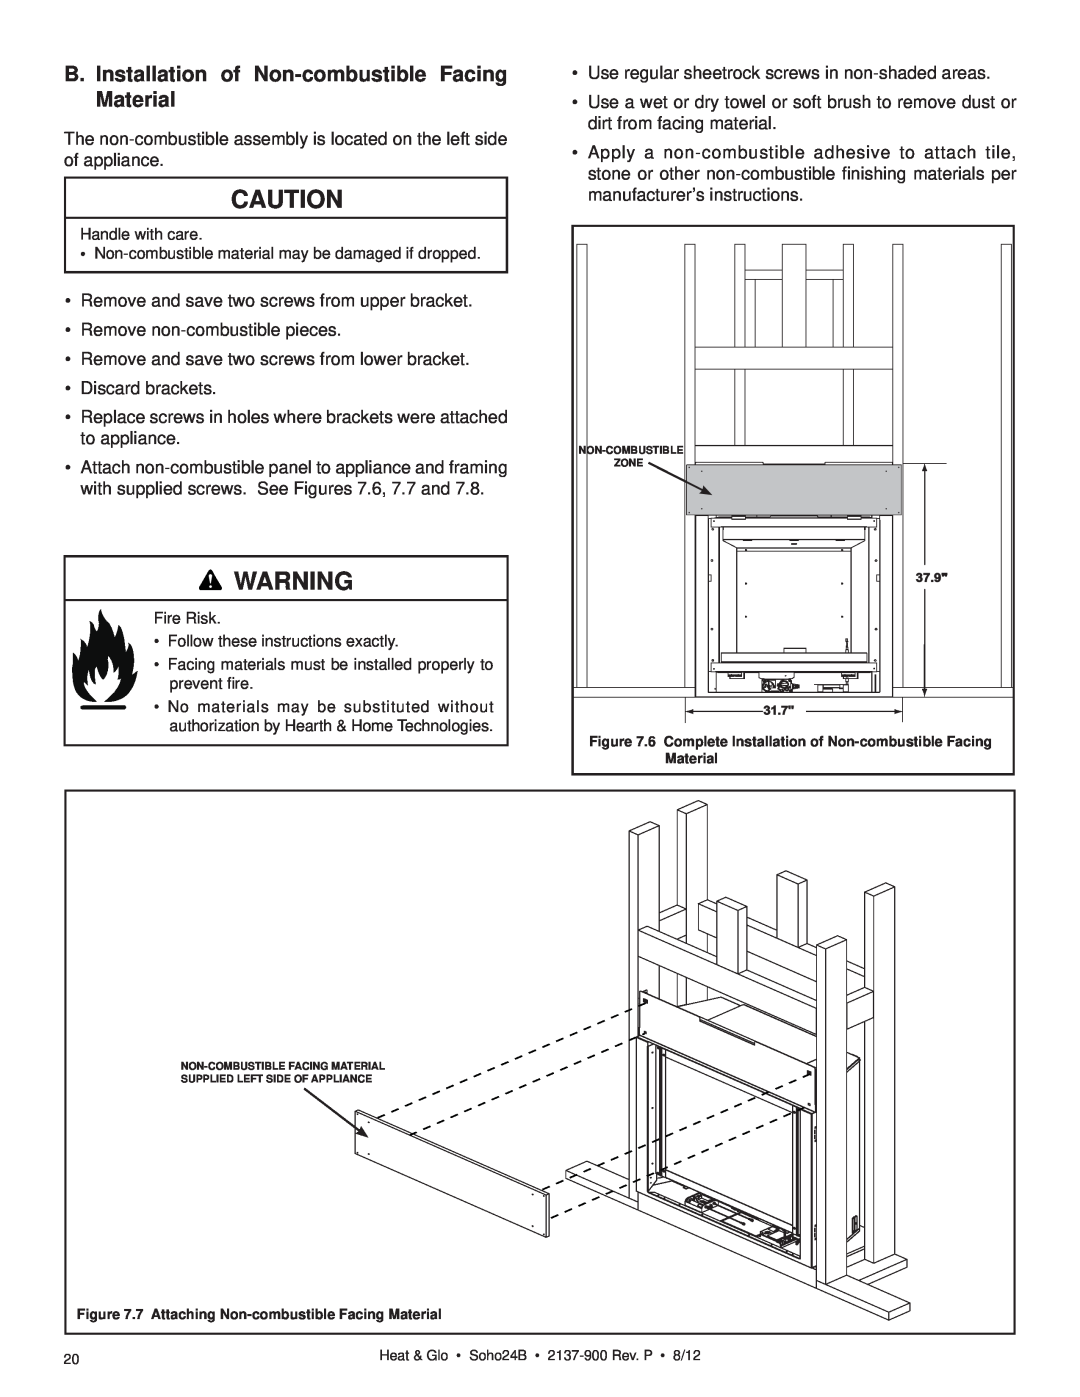 Heat & Glo LifeStyle 2137-900 owner manual B. Installation of Non-combustibleFacing Material 